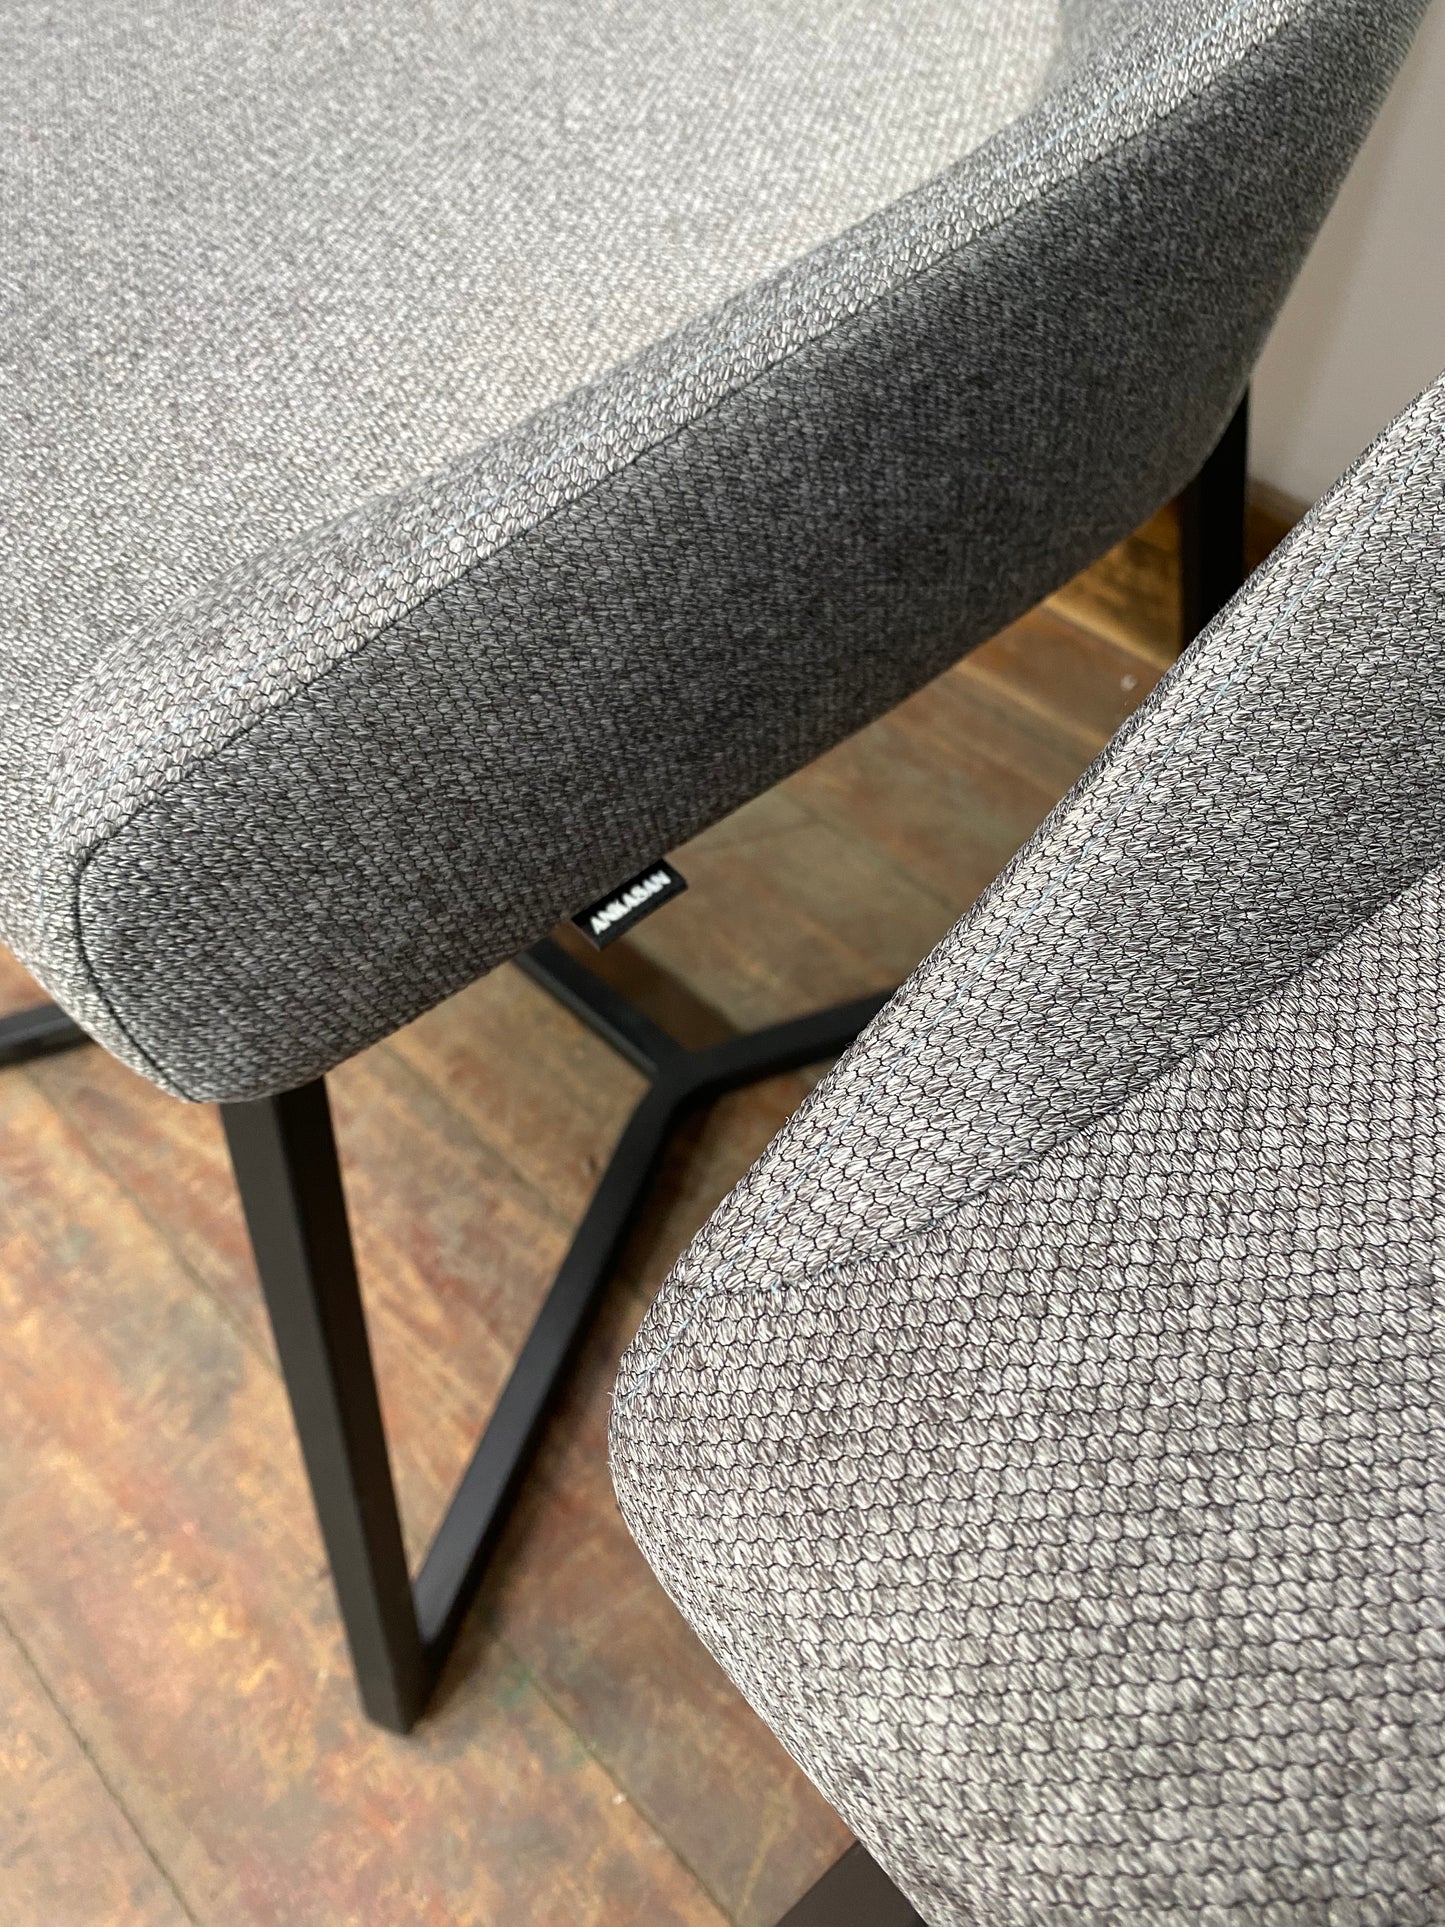 Set of 4 grey hex base office chairs (new)